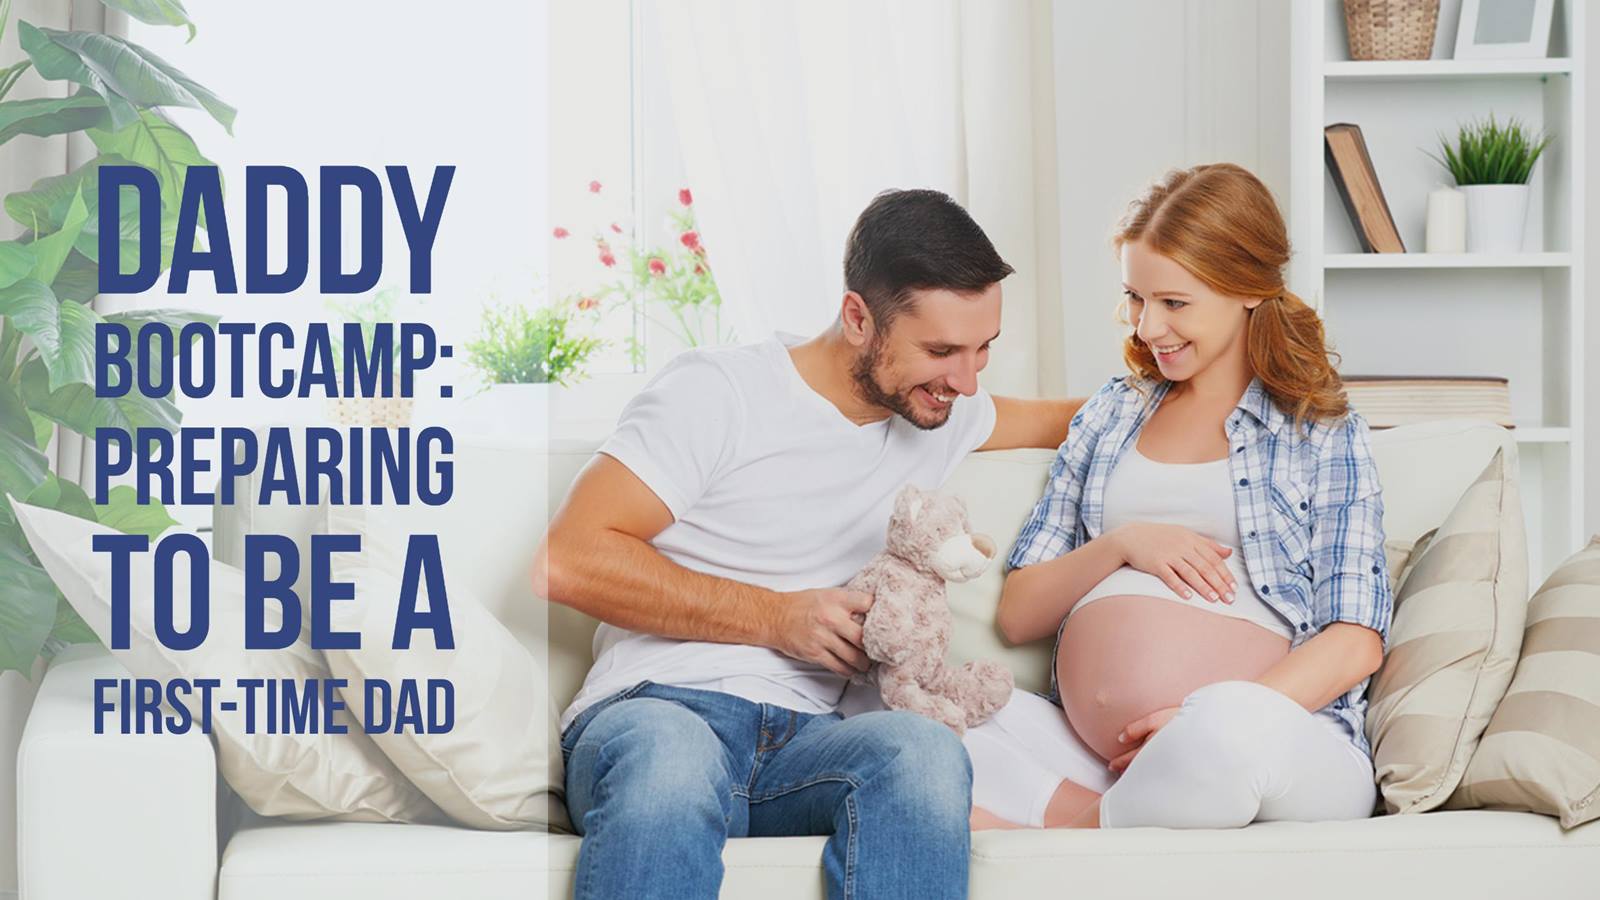 Daddy Bootcamp Steps To Help First Time Dads